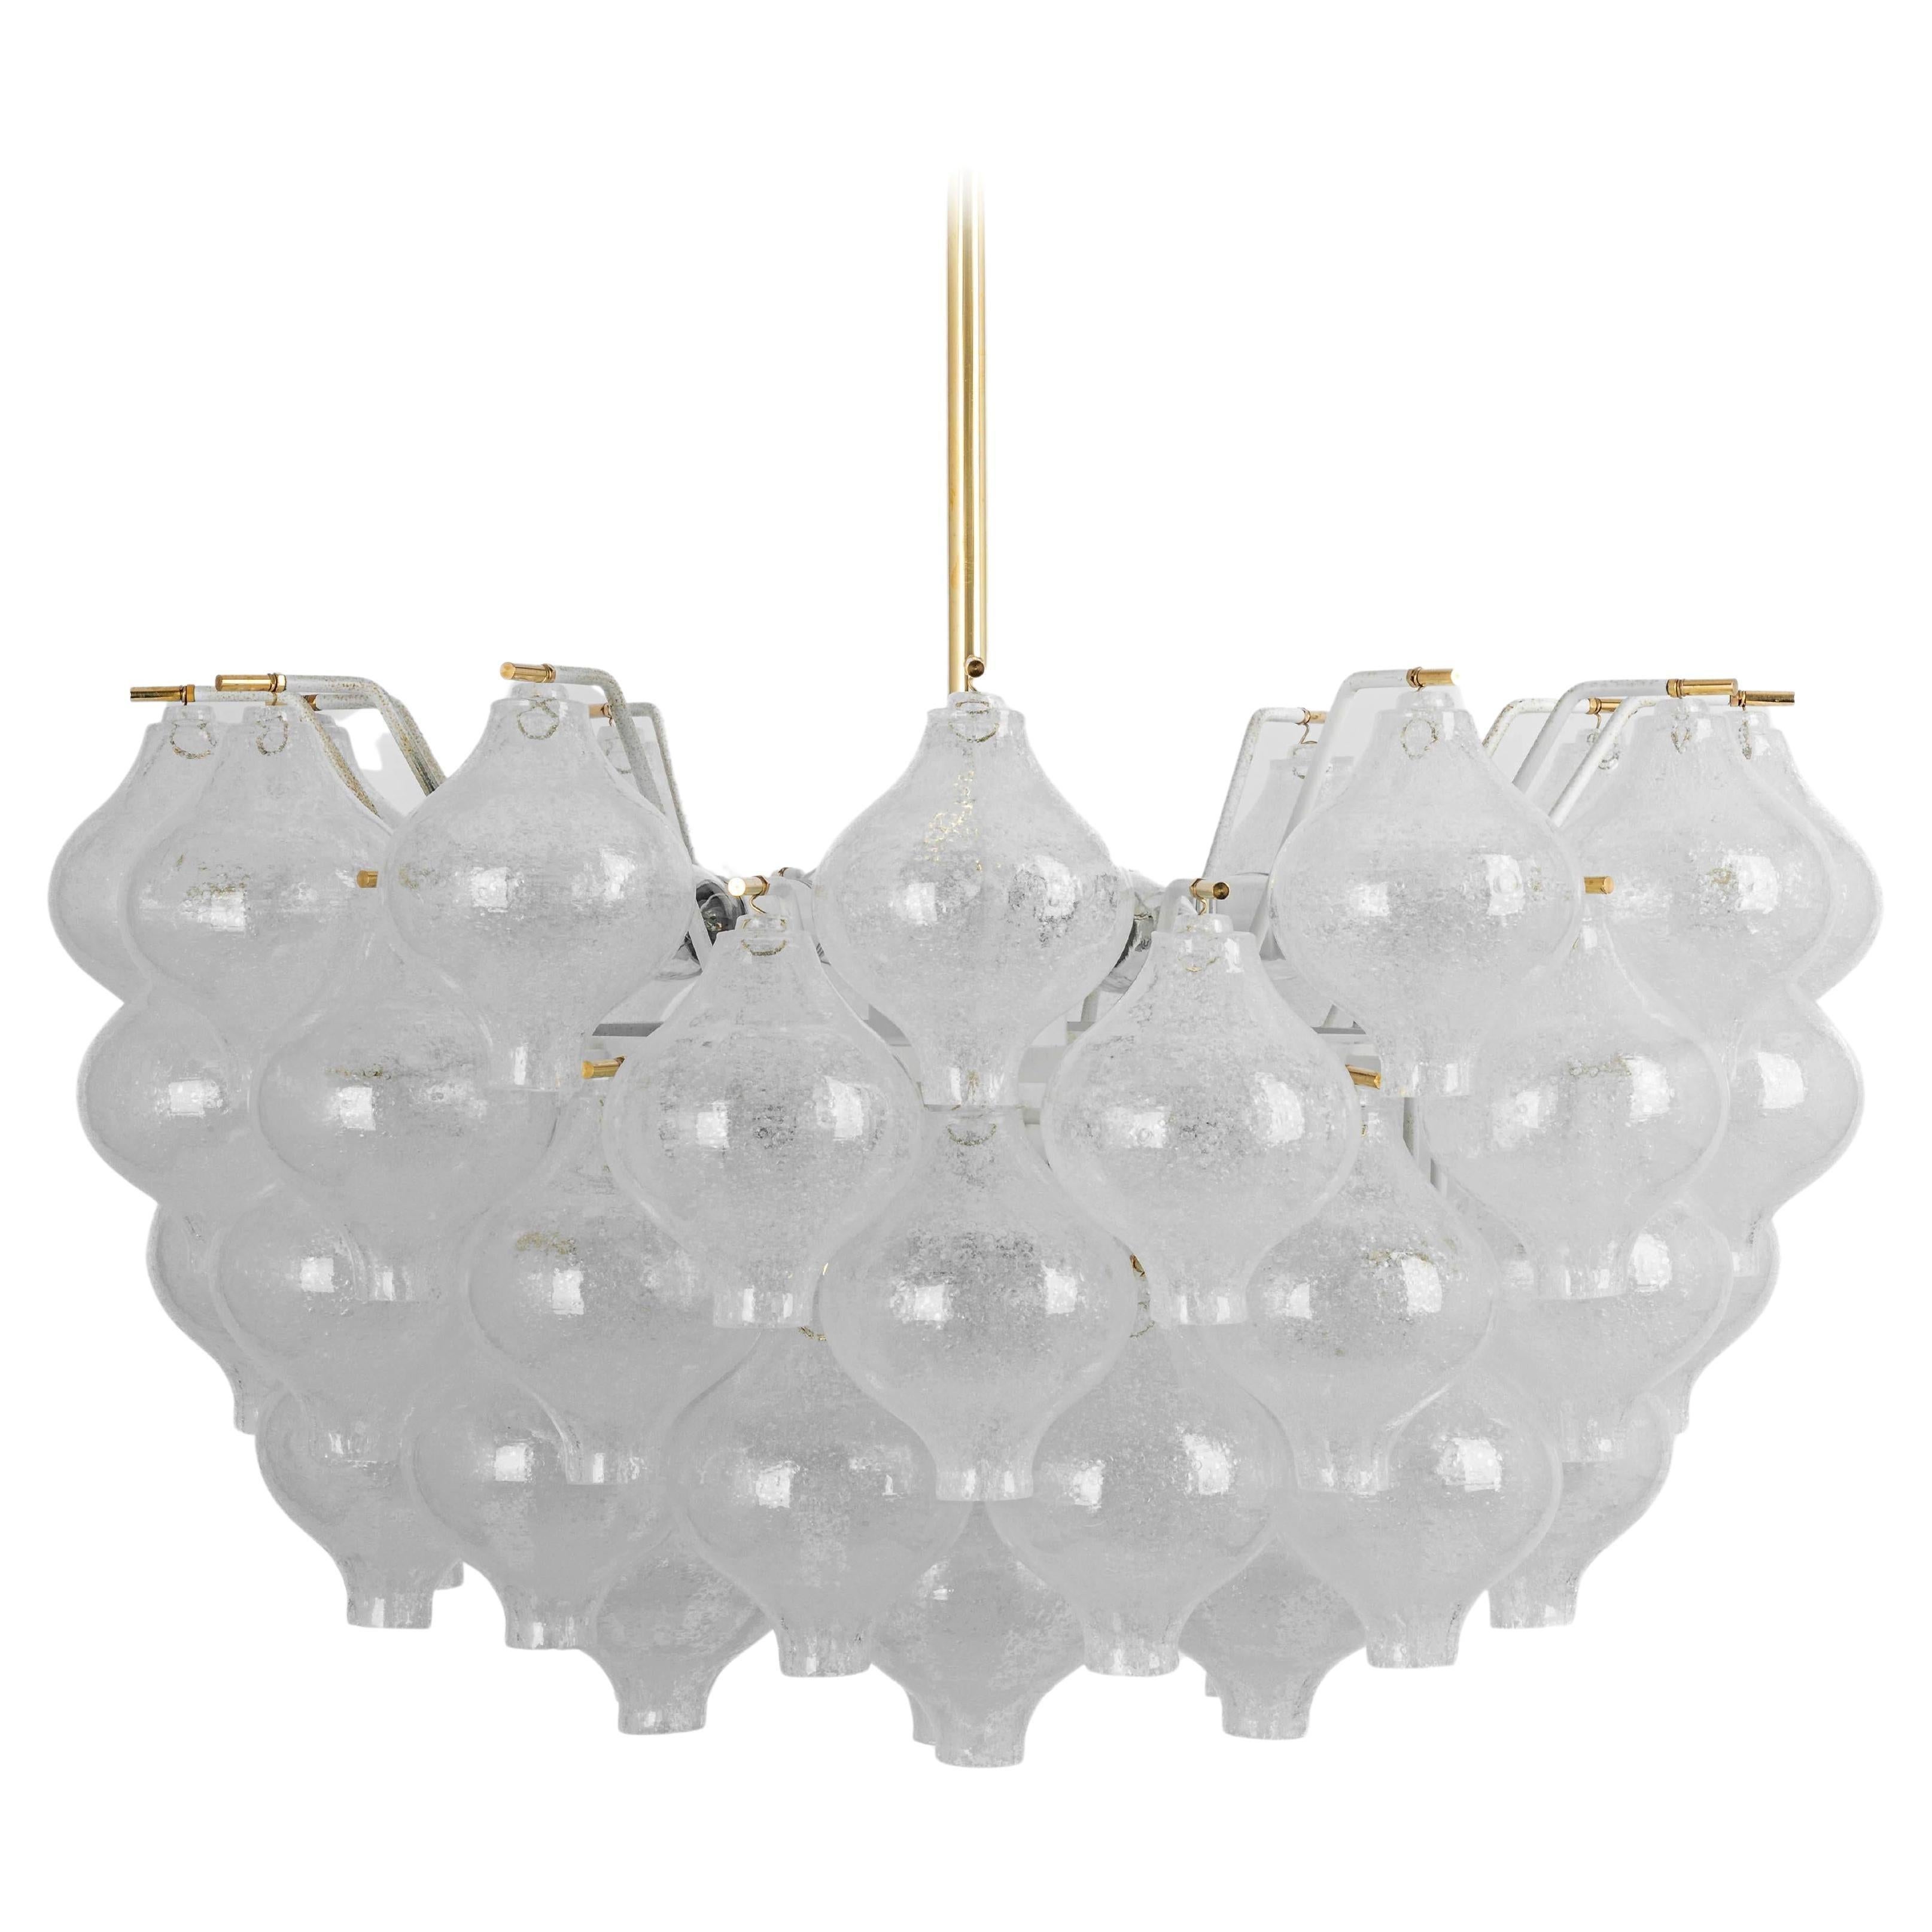 A large and fantastic light fixture model Tulipan 61 HL by J.T. Kalmar, Vienna, Austria, manufactured in midcentury, circa 1970 (late 1960s or early 1970s).
The name Tulipan derives from the tulip shaped hand blown bubble glasses. Each glass piece